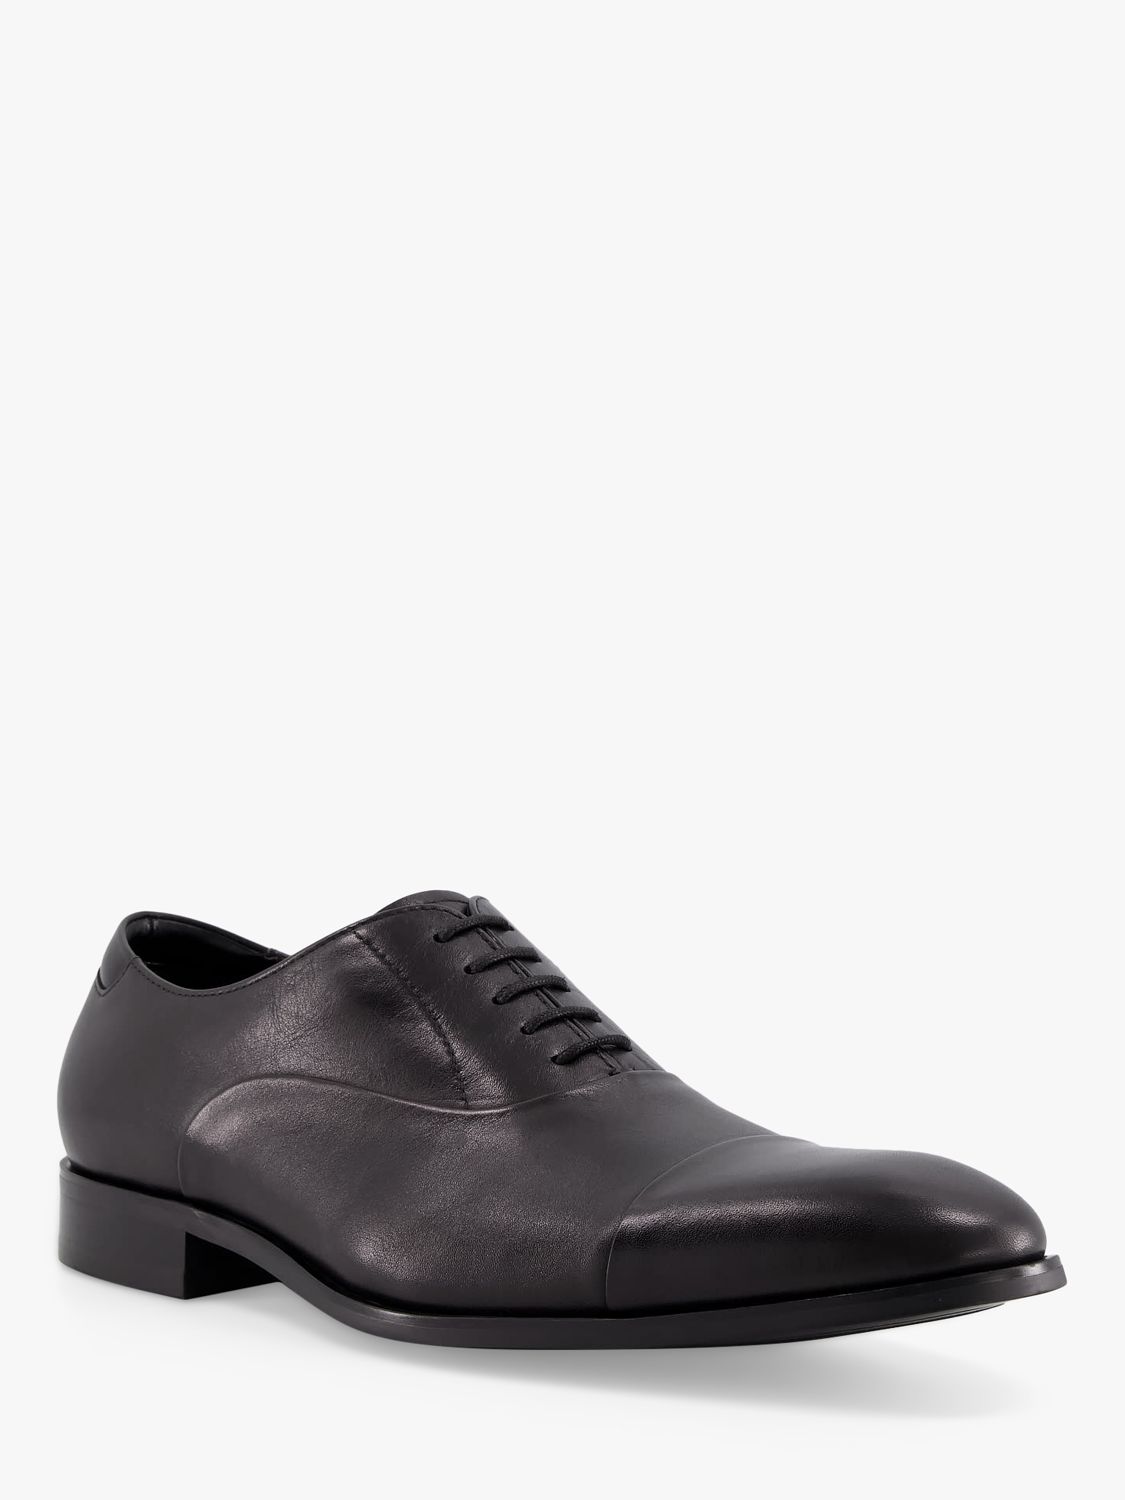 Dune Wide Fit Secrecy Leather Derby Shoes, Black at John Lewis & Partners